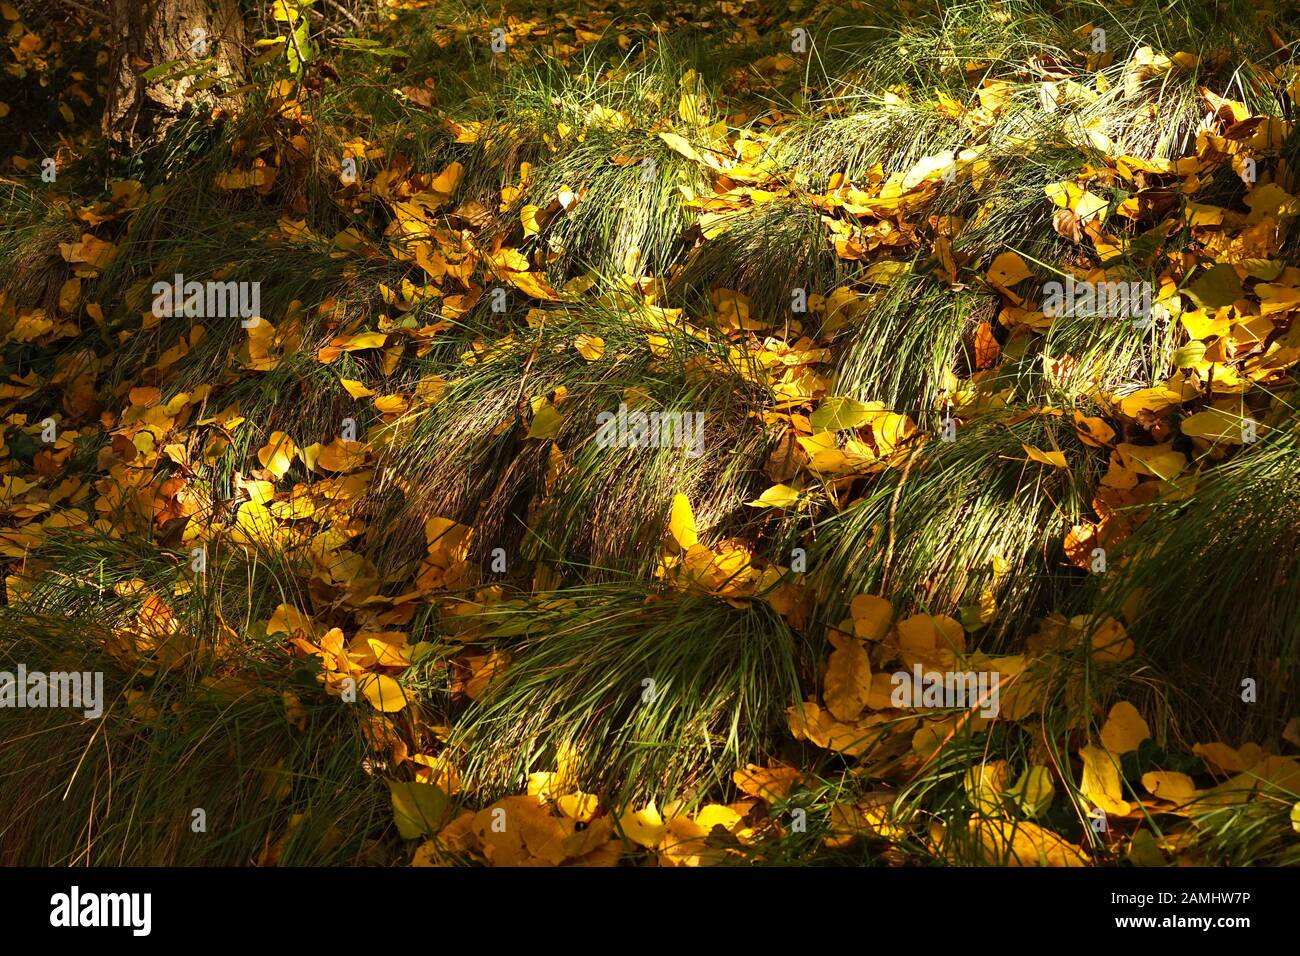 Autumnal yellow fallen leaves on mounds of long green grass in dappled sunlight and shade Stock Photo